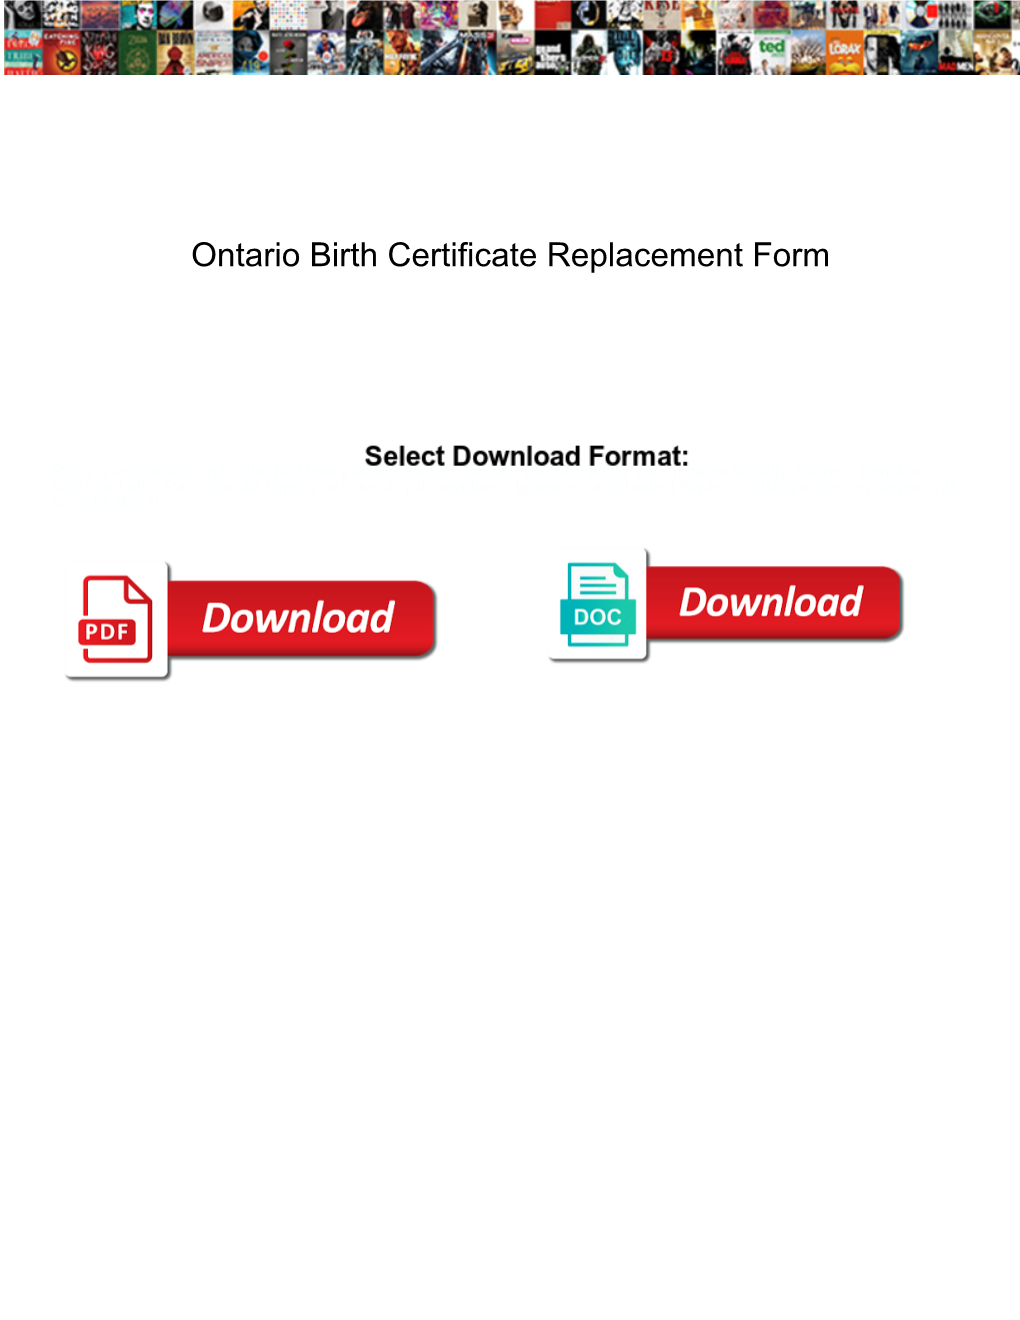 Ontario Birth Certificate Replacement Form